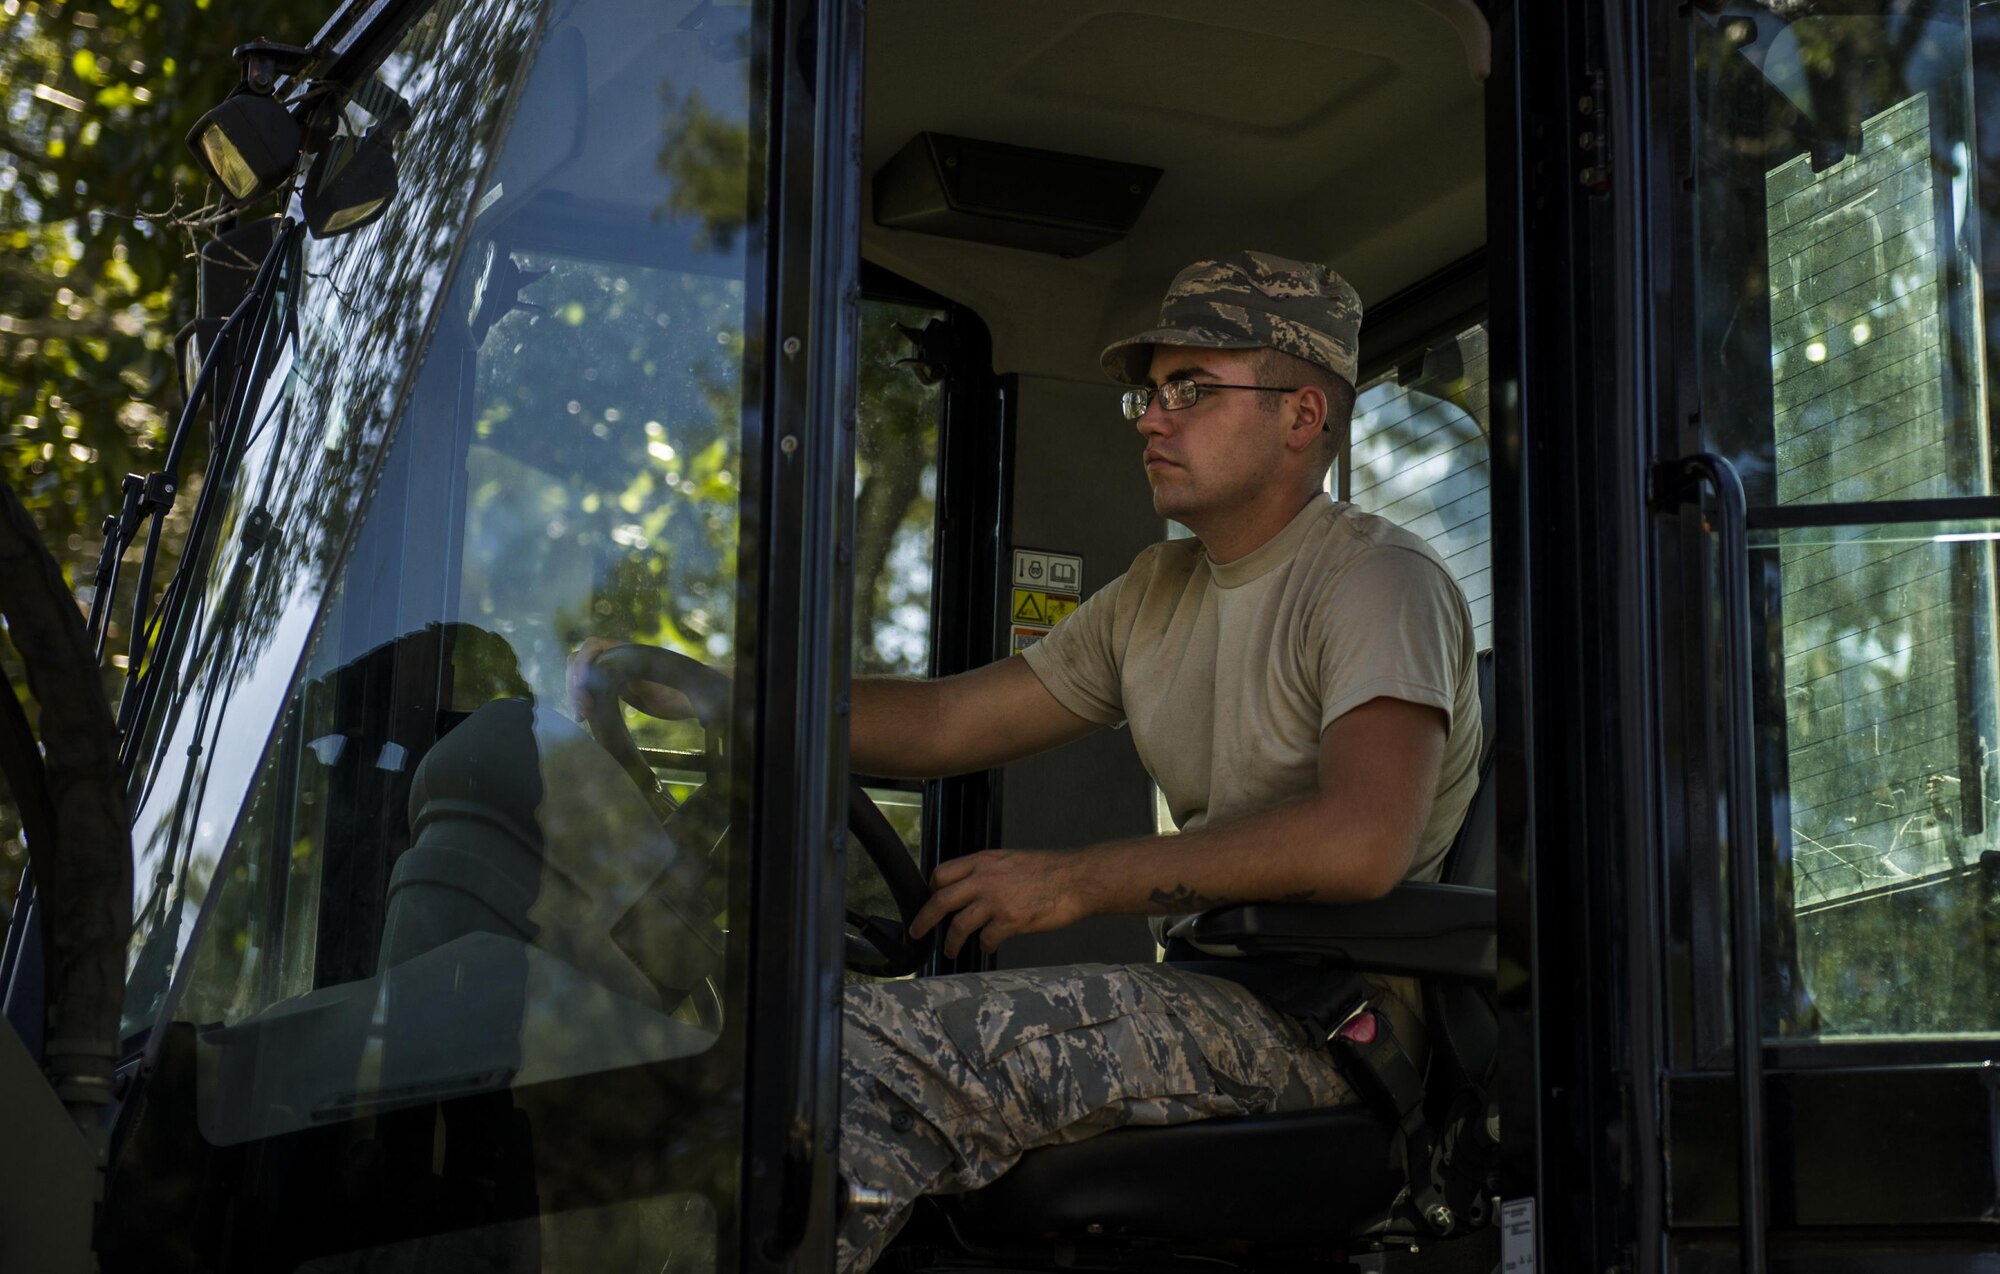 Senior Airman David Asbury, a pavement and heavy equipment specialist with the 1st Special Operations Civil Engineer Squadron, operates a forklift at Hurlburt Field, Fla., Oct. 4, 2016. Pavement and heavy equipment specialists are responsible for inspecting, constructing and repairing airfield pavements, roads, streets, curbs, surface mats and other areas using paving and surfacing procedures. (U.S. Air Force photo by Airman 1st Class Joseph Pick)